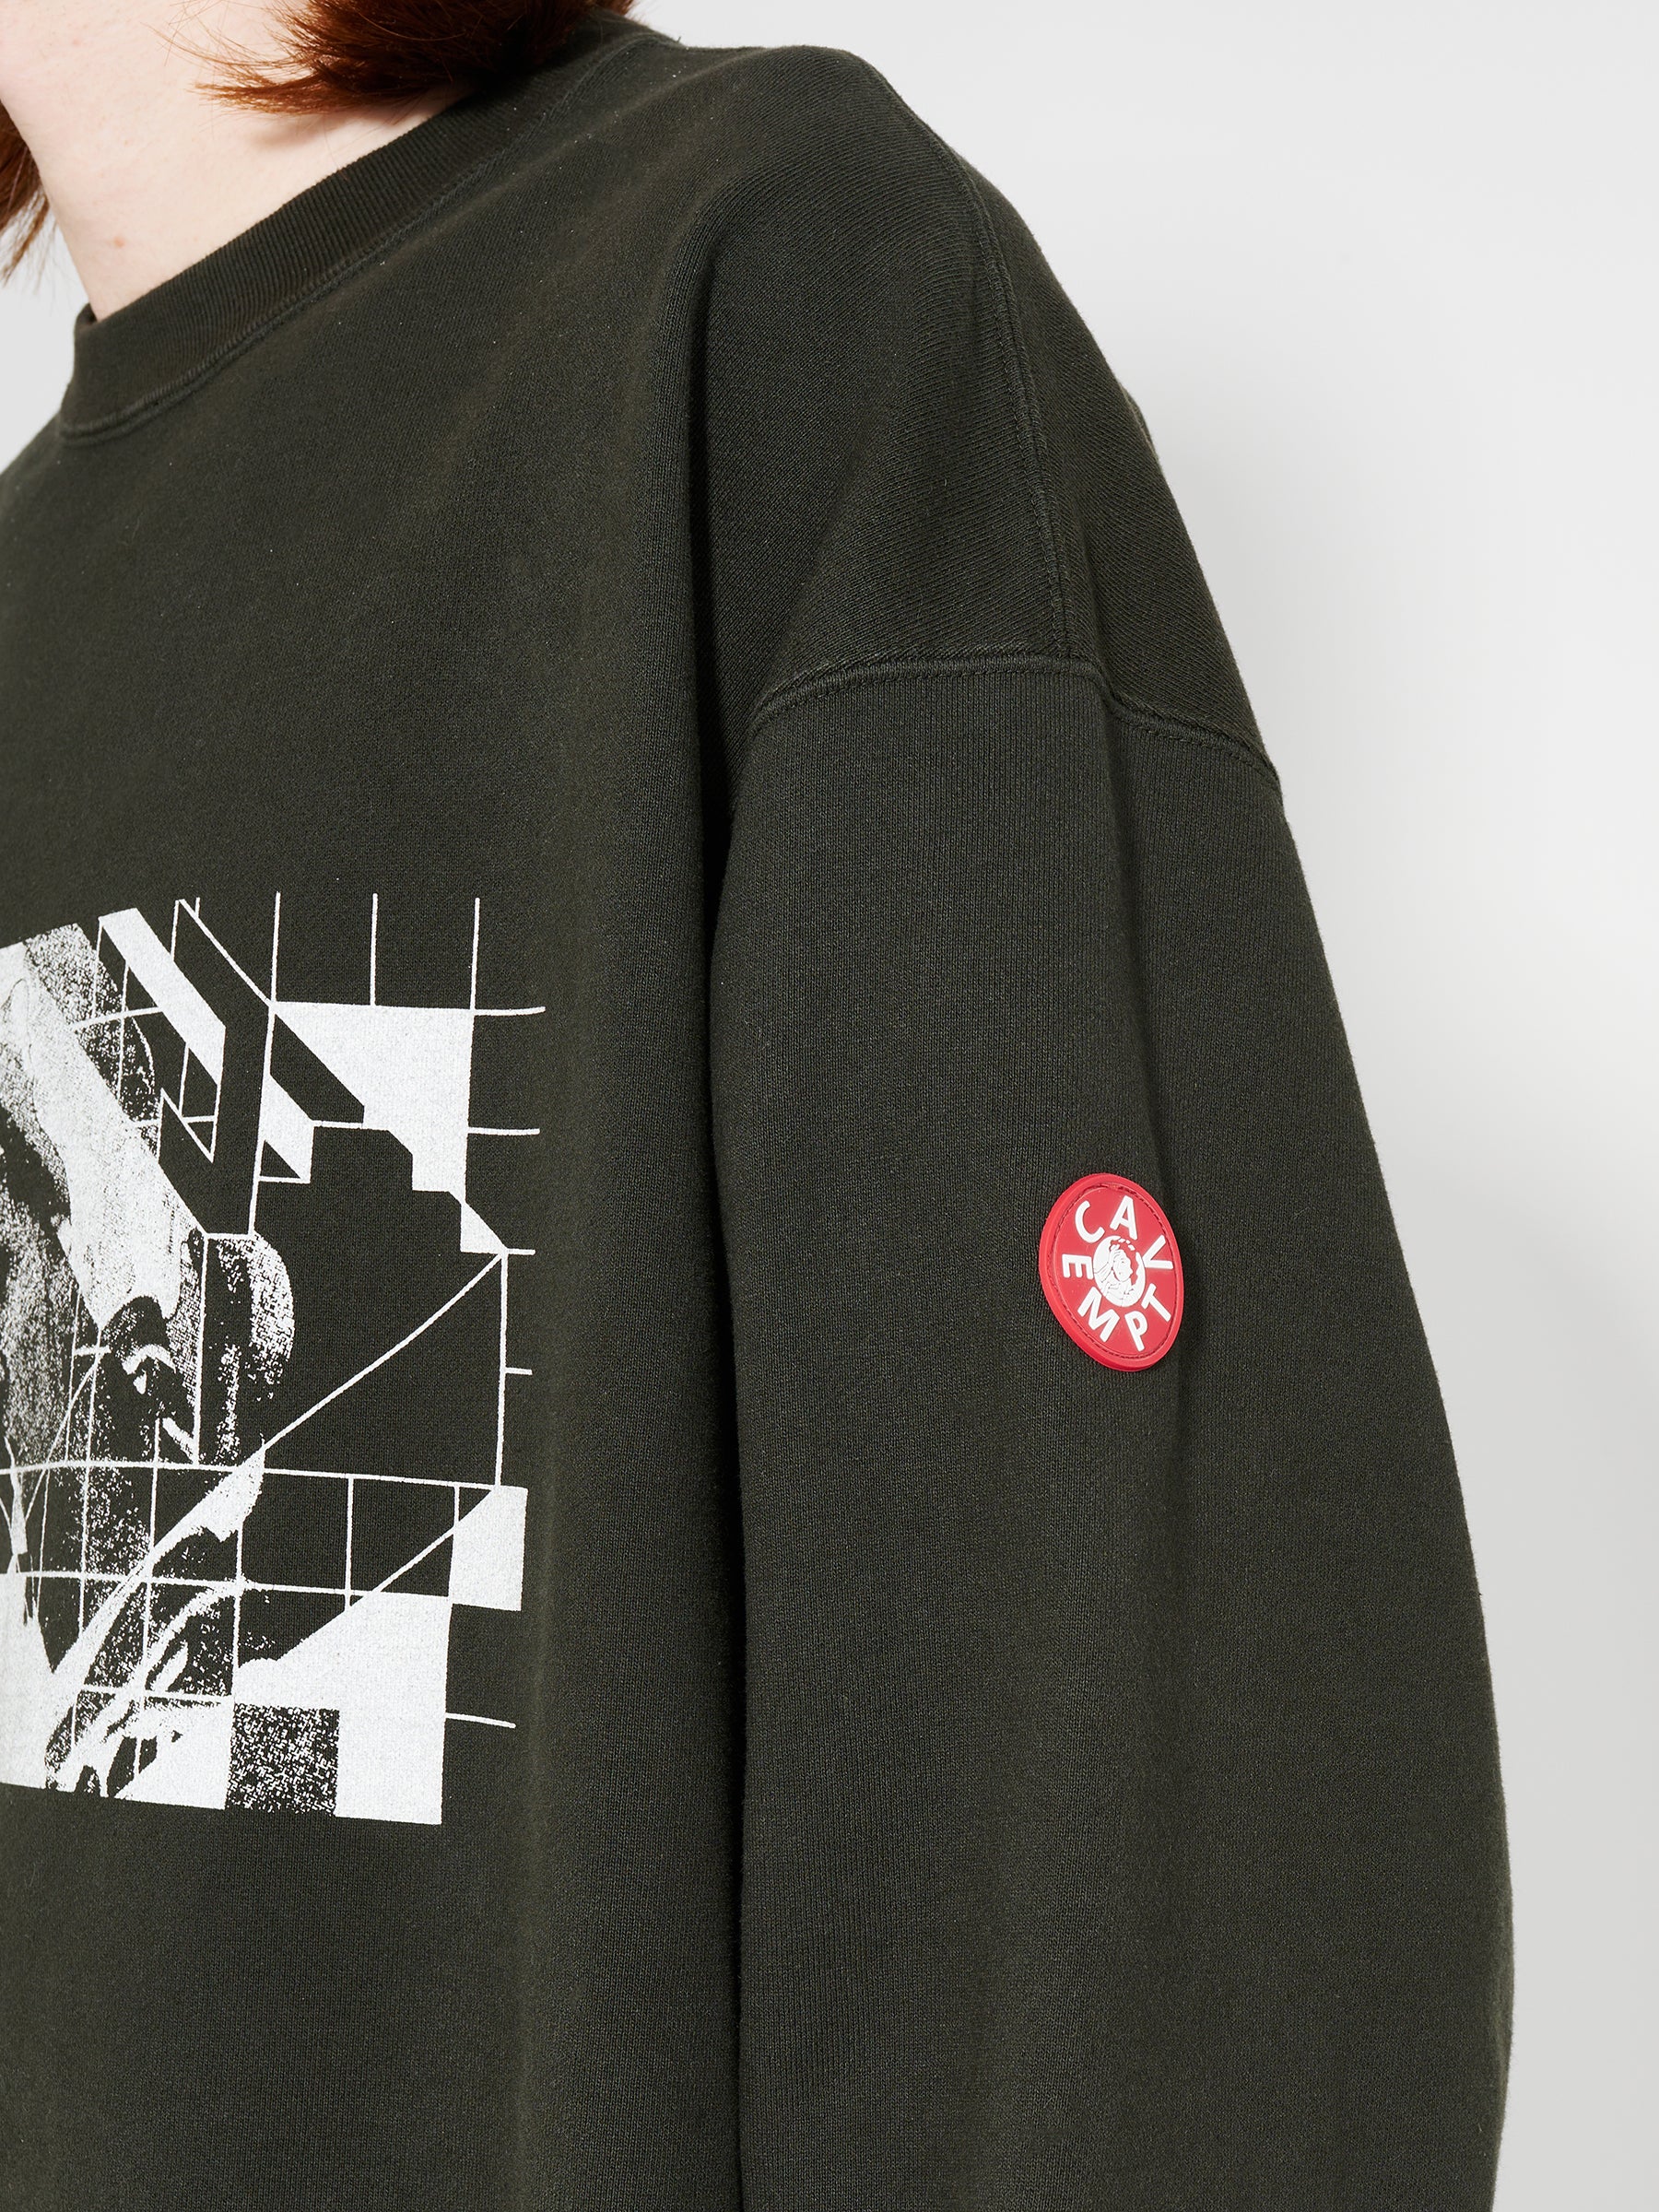 Cav Empt Washed Dimensions Crew Neck